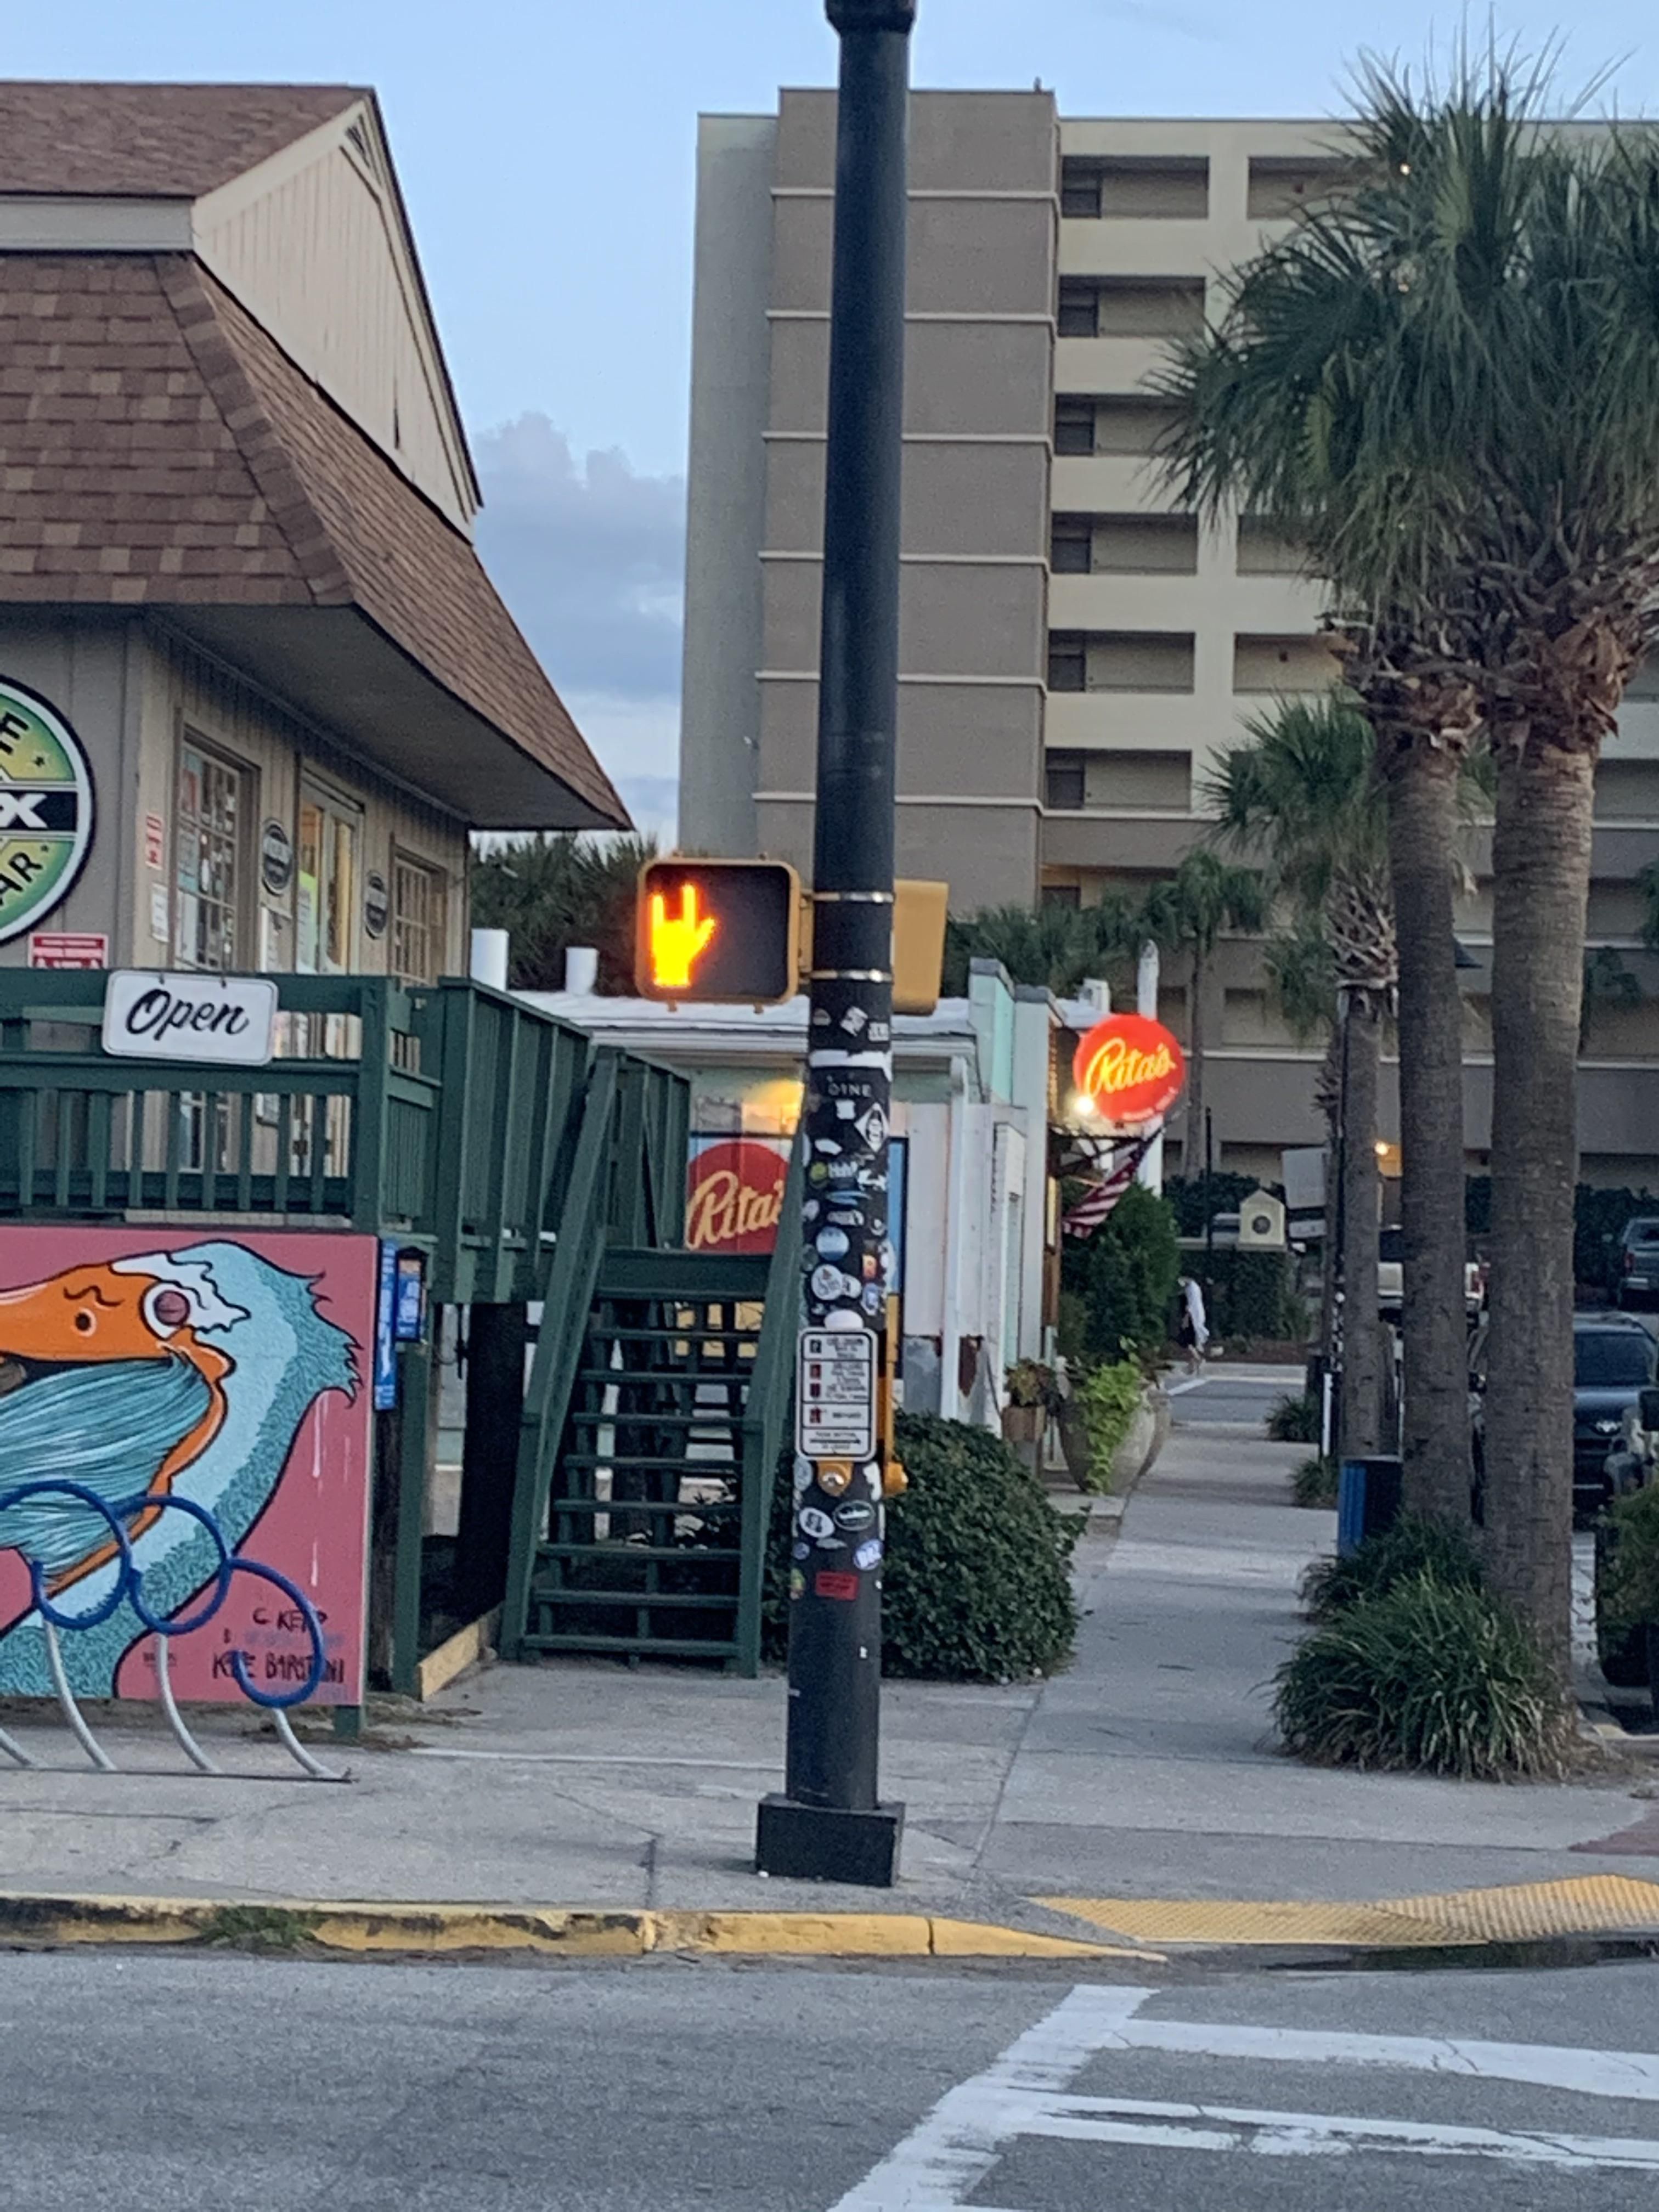 This pedestrian light in Folly Beach. I assume it’s broken because all of the others around it have five fingers.